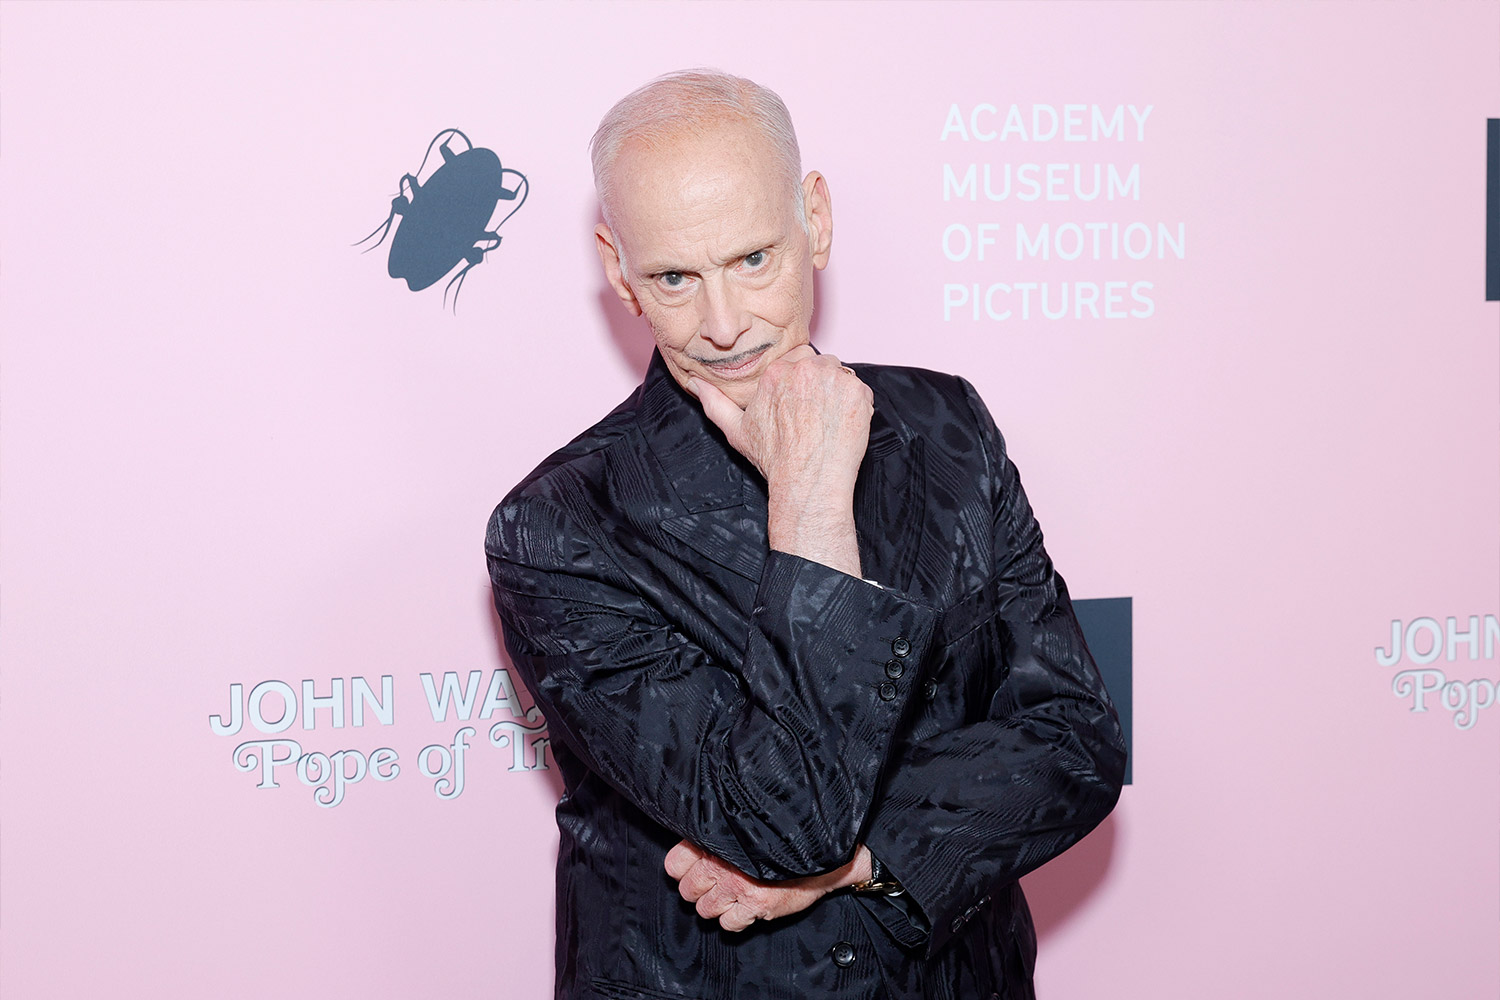 John Waters holding his chin and posing in front of a pink background at an Academy Museum of Motion Pictures event